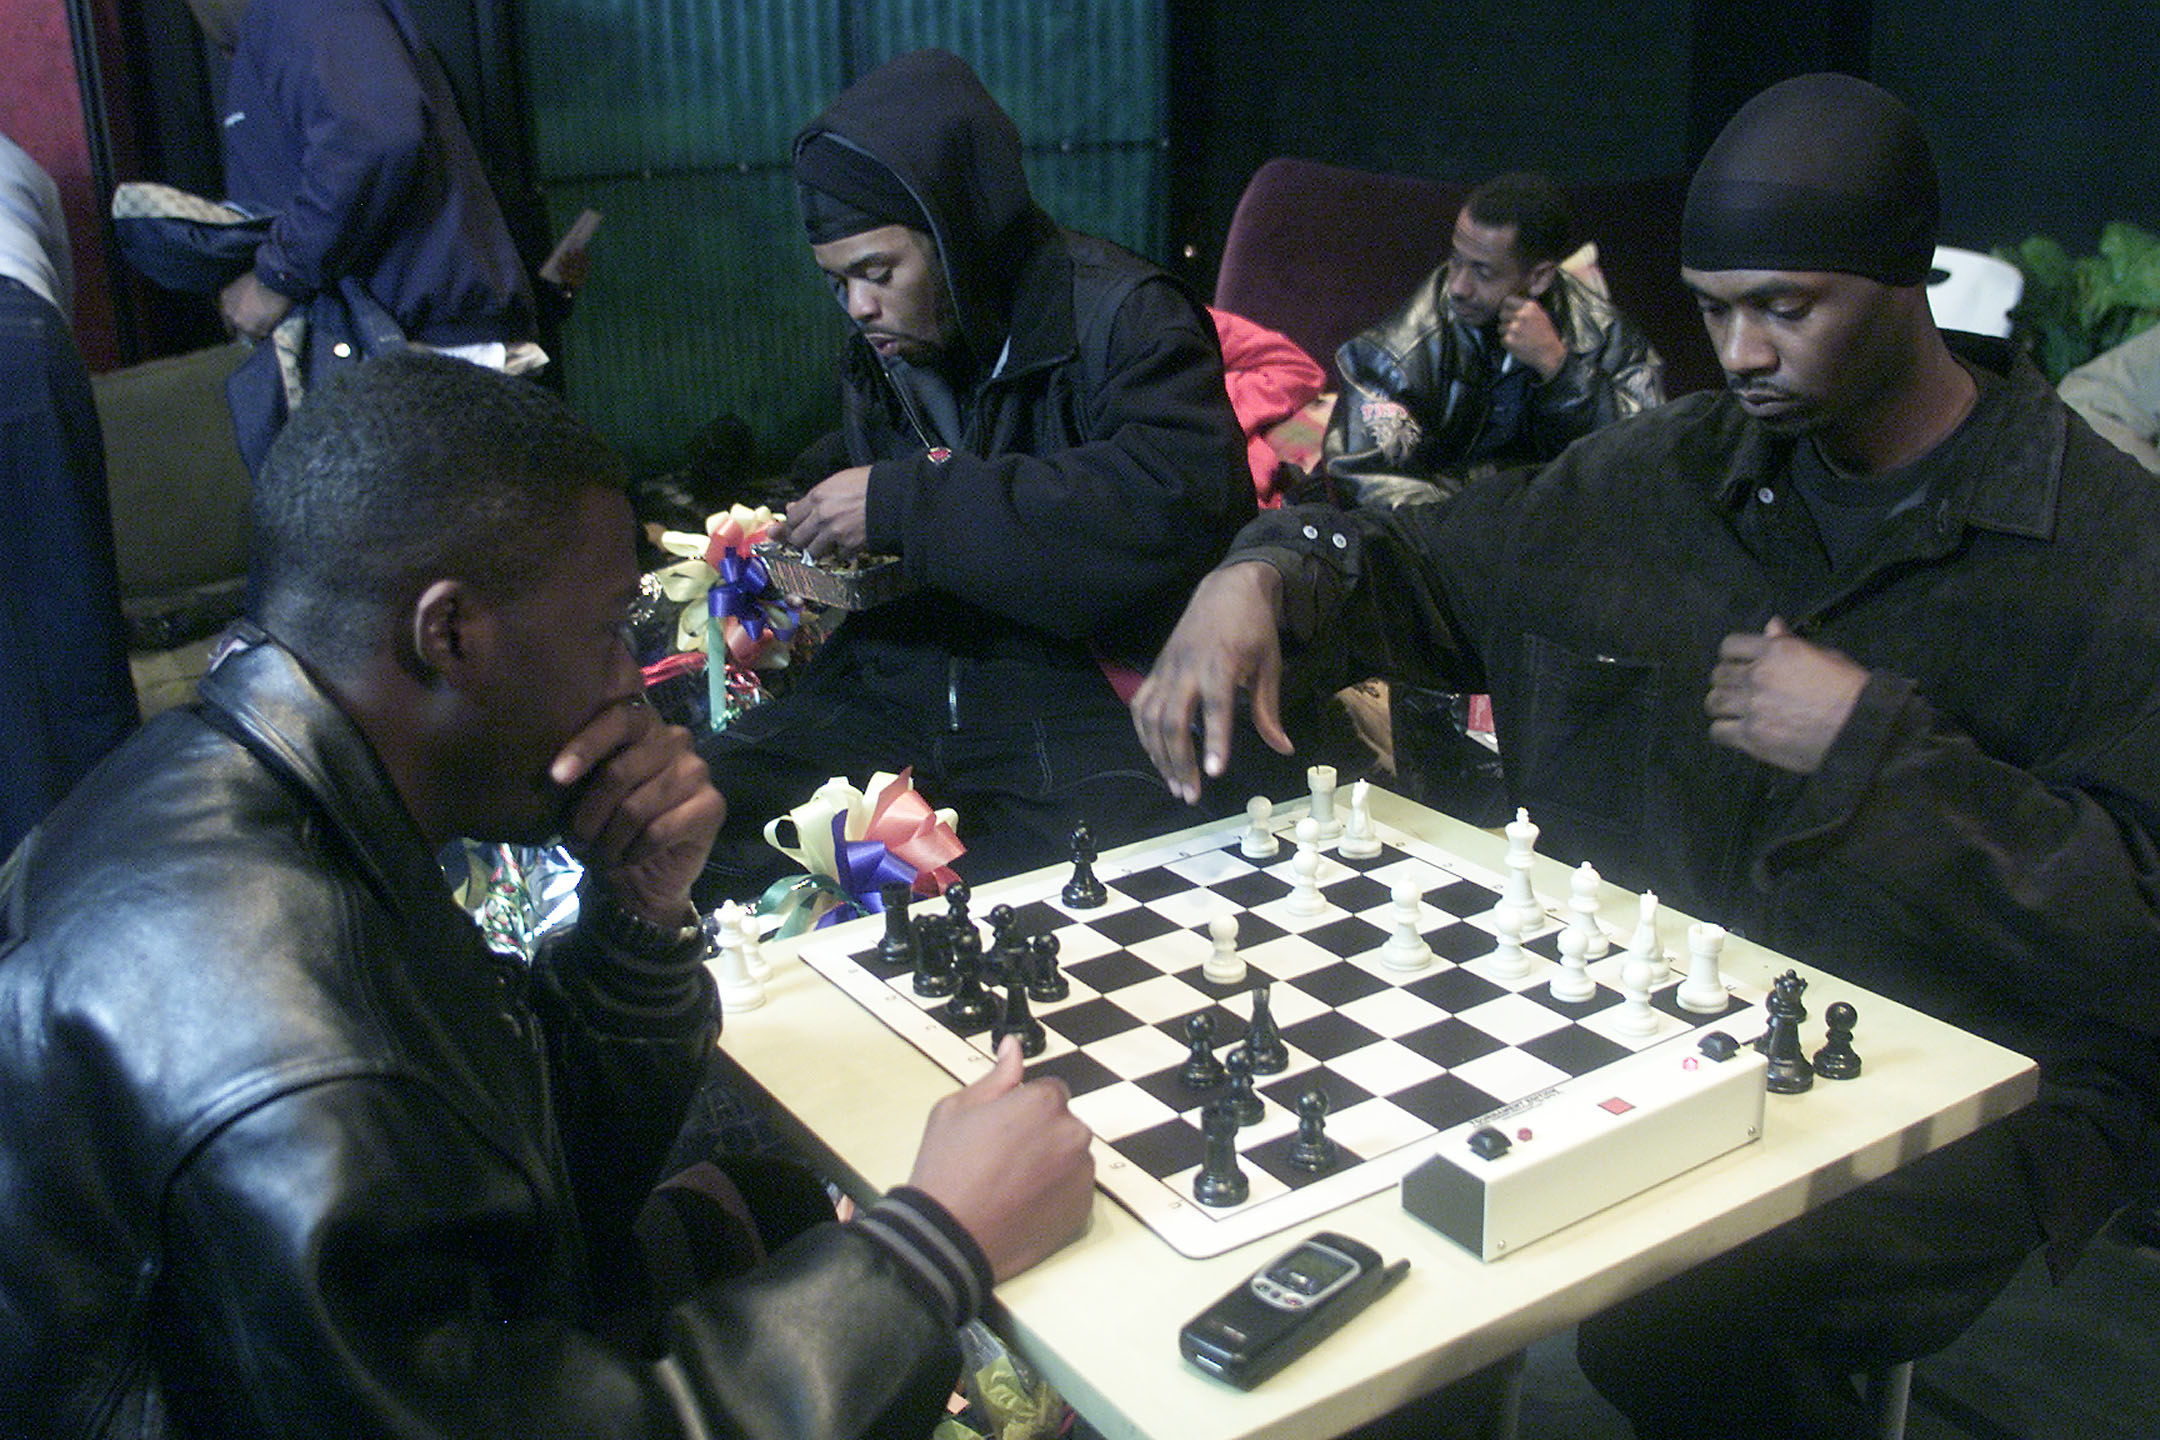 Four men hang out in a backstage green room; two of them in the foreground play chess